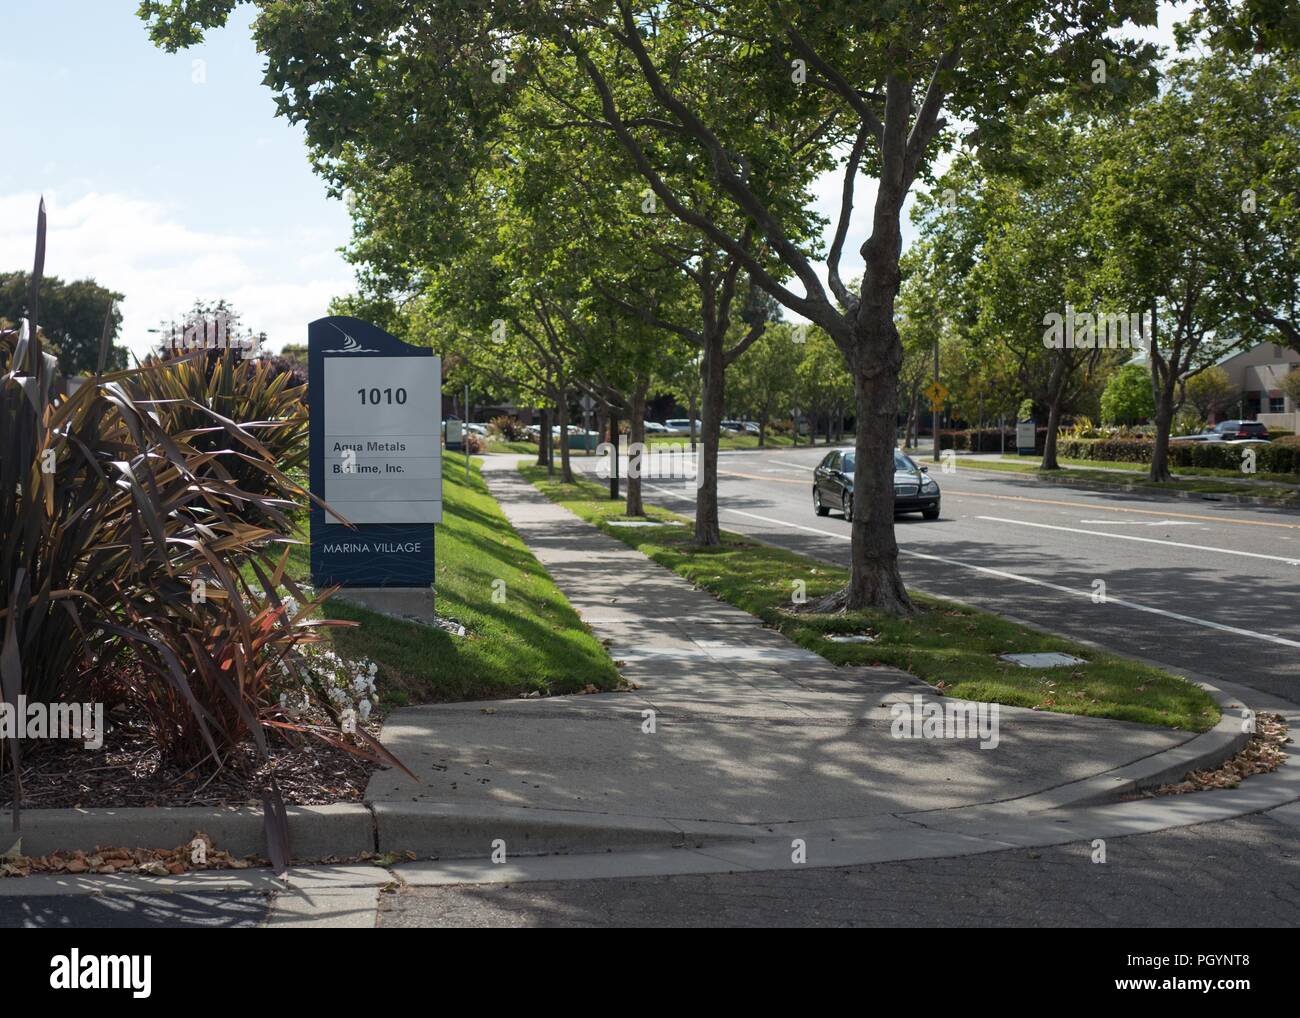 Sign for materials company Aqua Metals and biotechnology company Biotime in the Marina Village office park on the Alameda, California, May 14, 2018. () Stock Photo